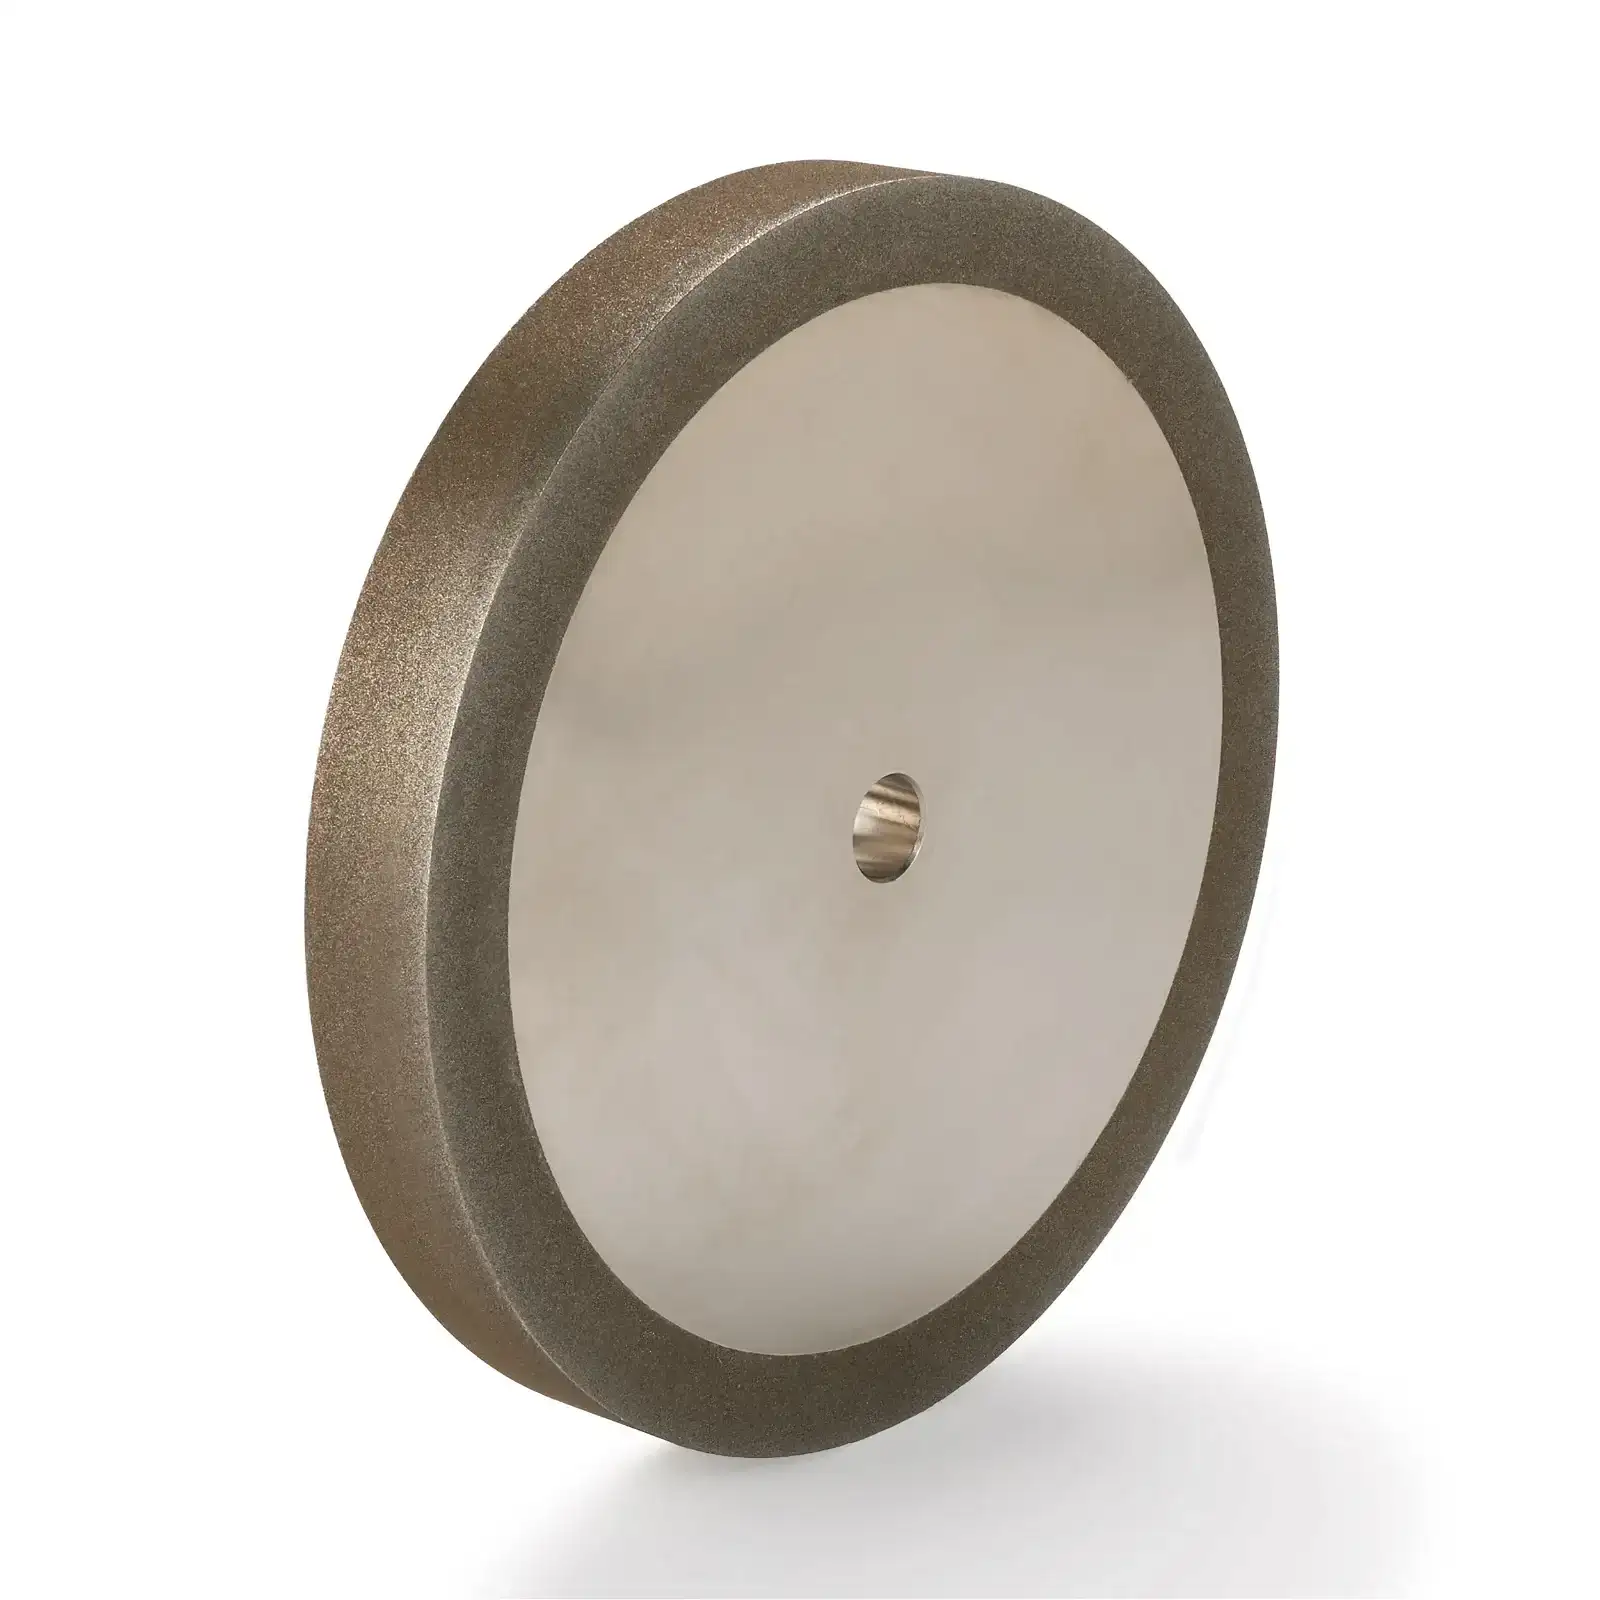 Save \\$43 - WoodRiver® 180 Grit CBN Grinding Wheel - 8" x 1" for Grinders with a 5/8" Arbor